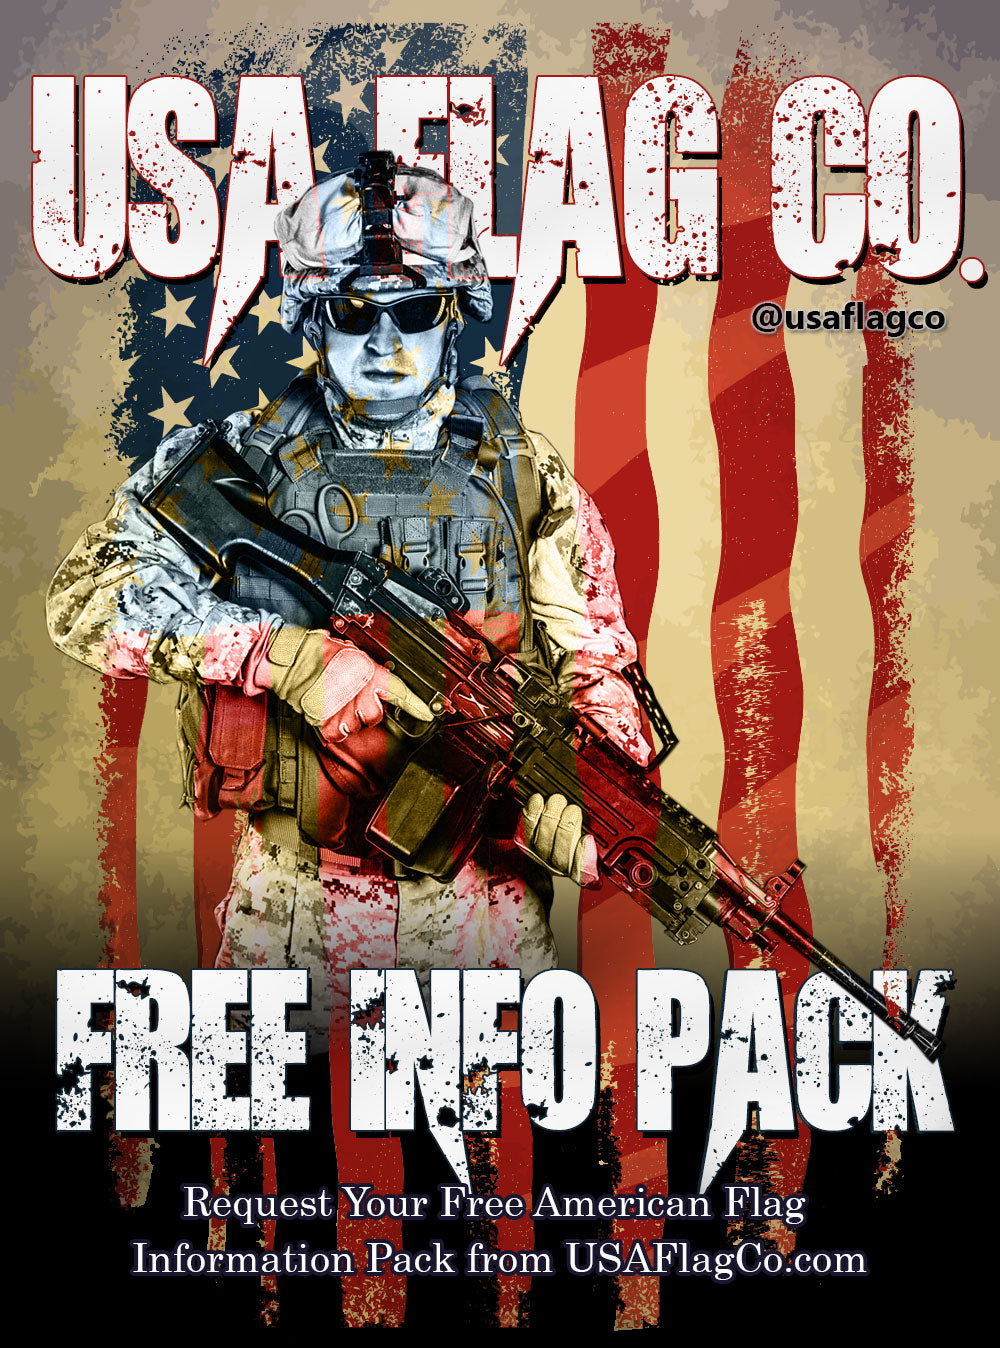 Request Your Free American Flag Information Pack from USA Flag Co.